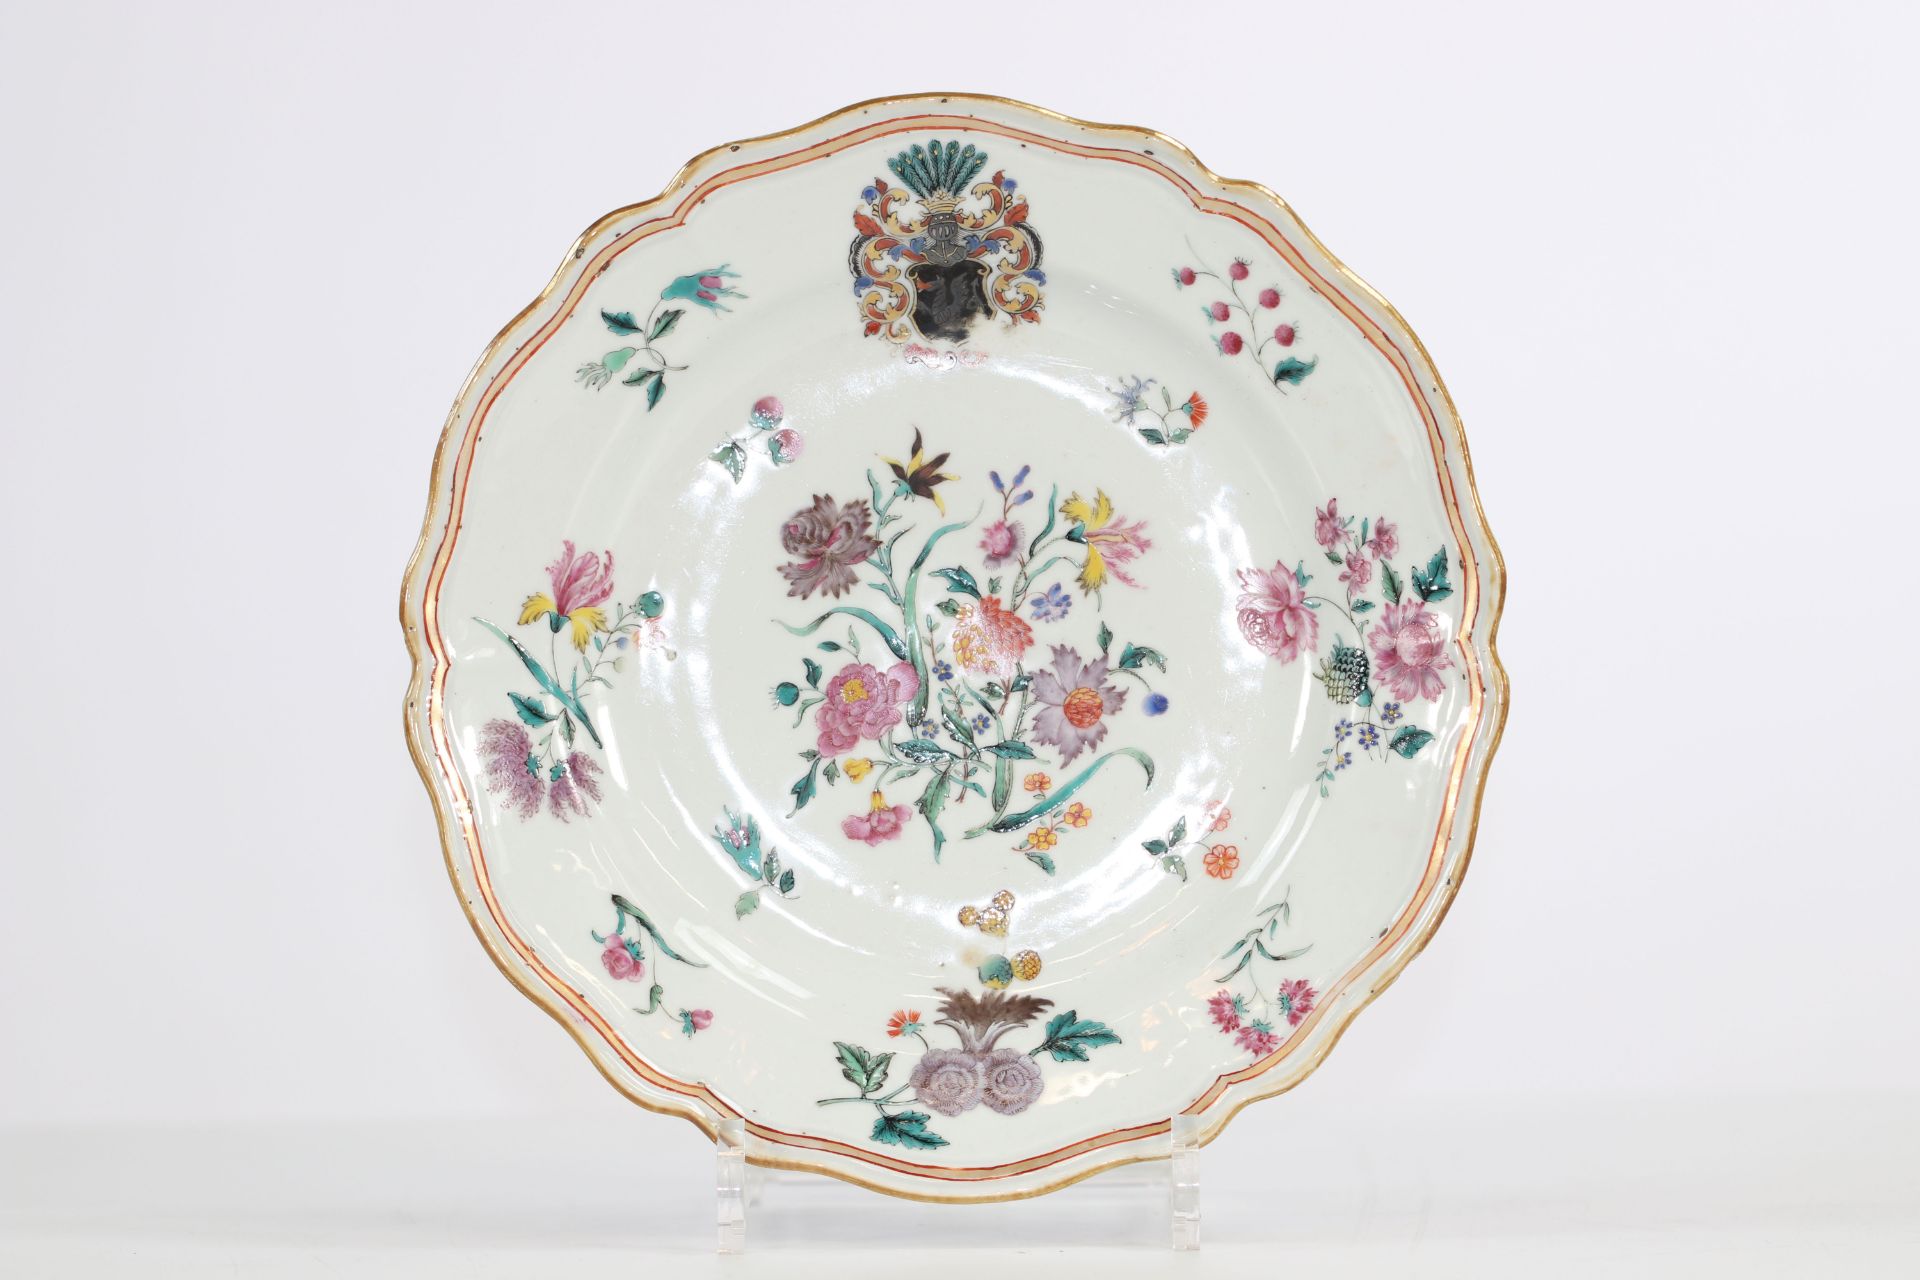 China porcelain plate from the 18th century